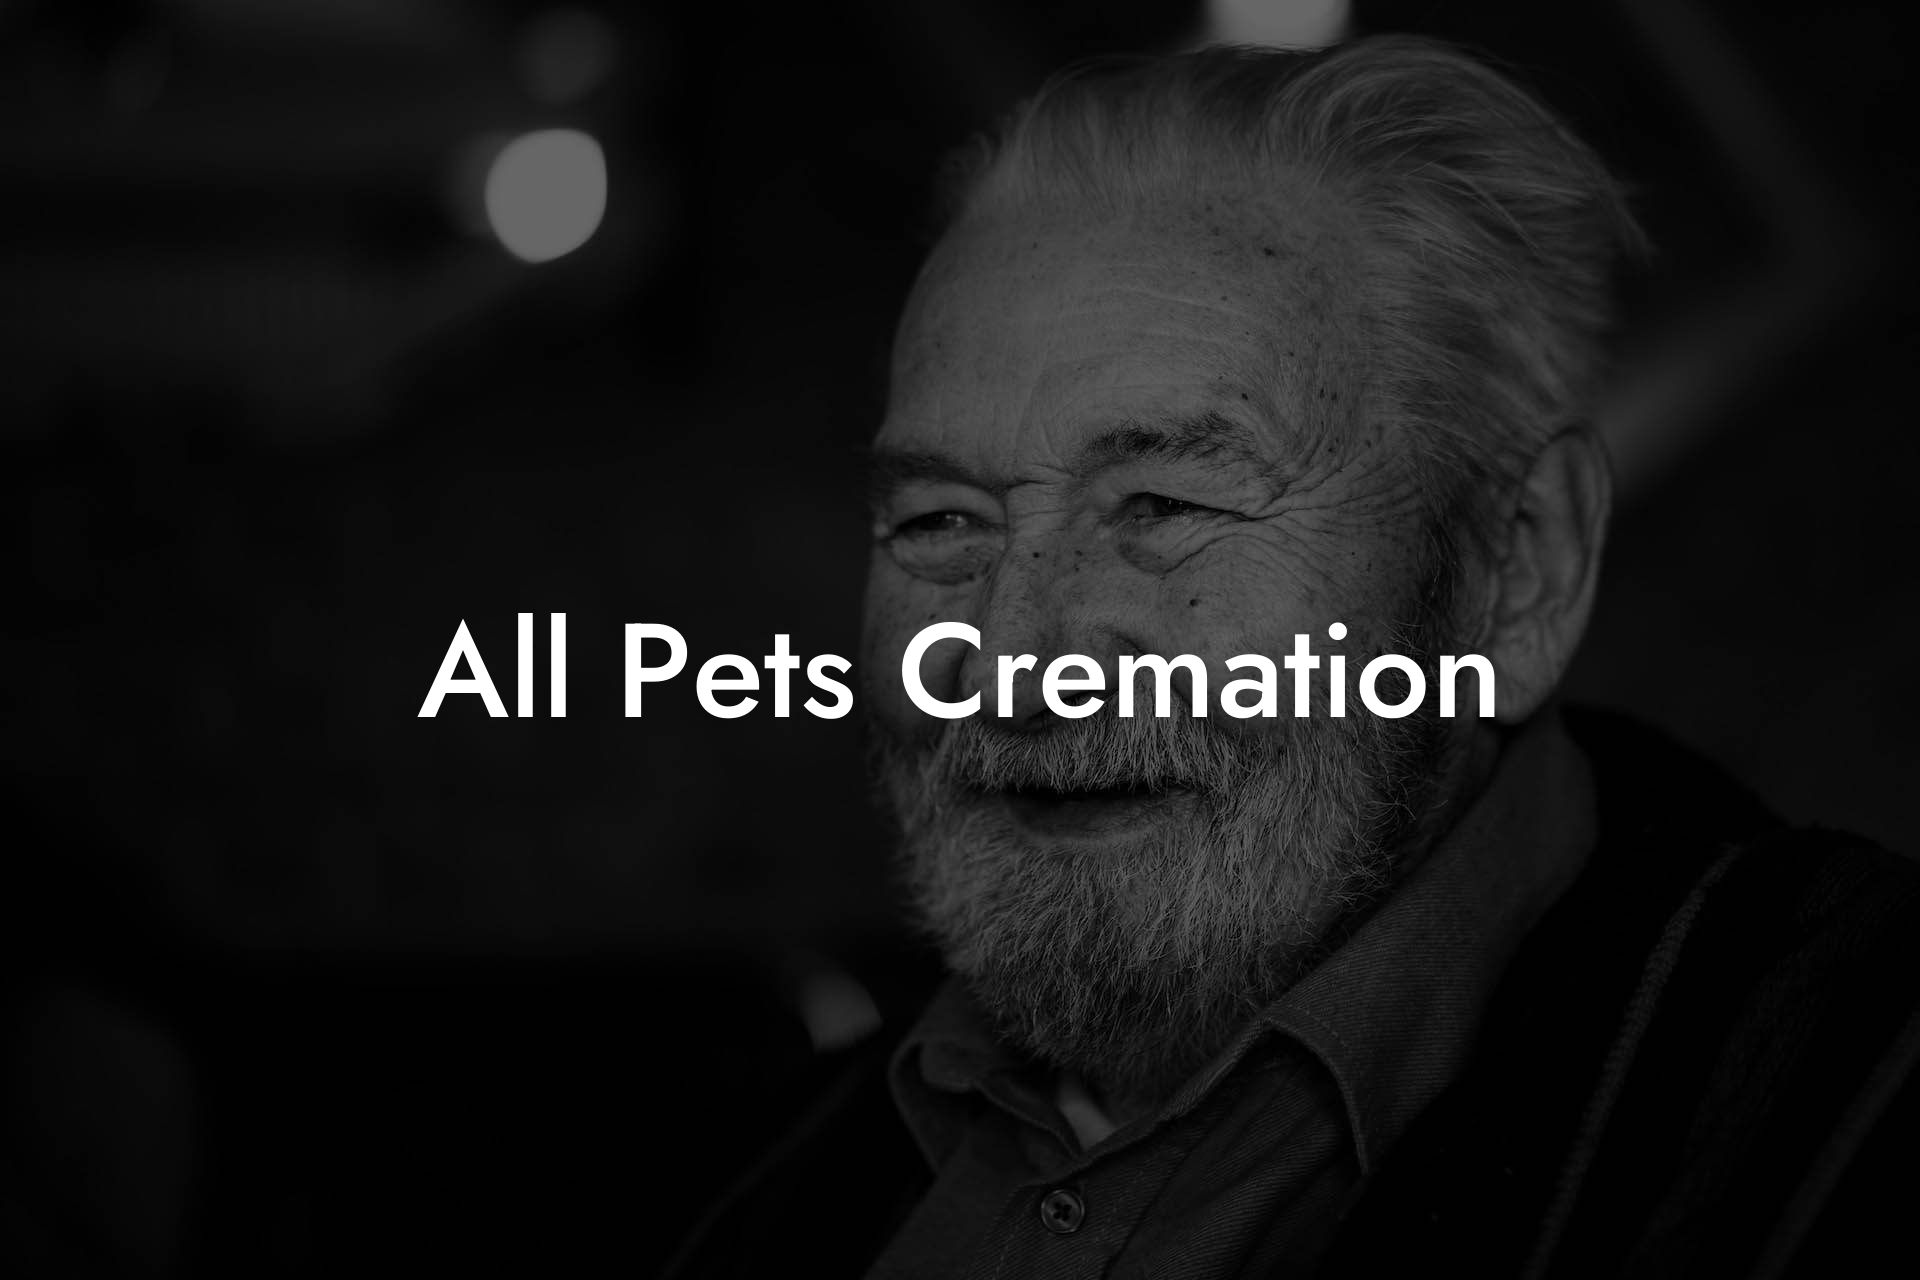 All Pets Cremation